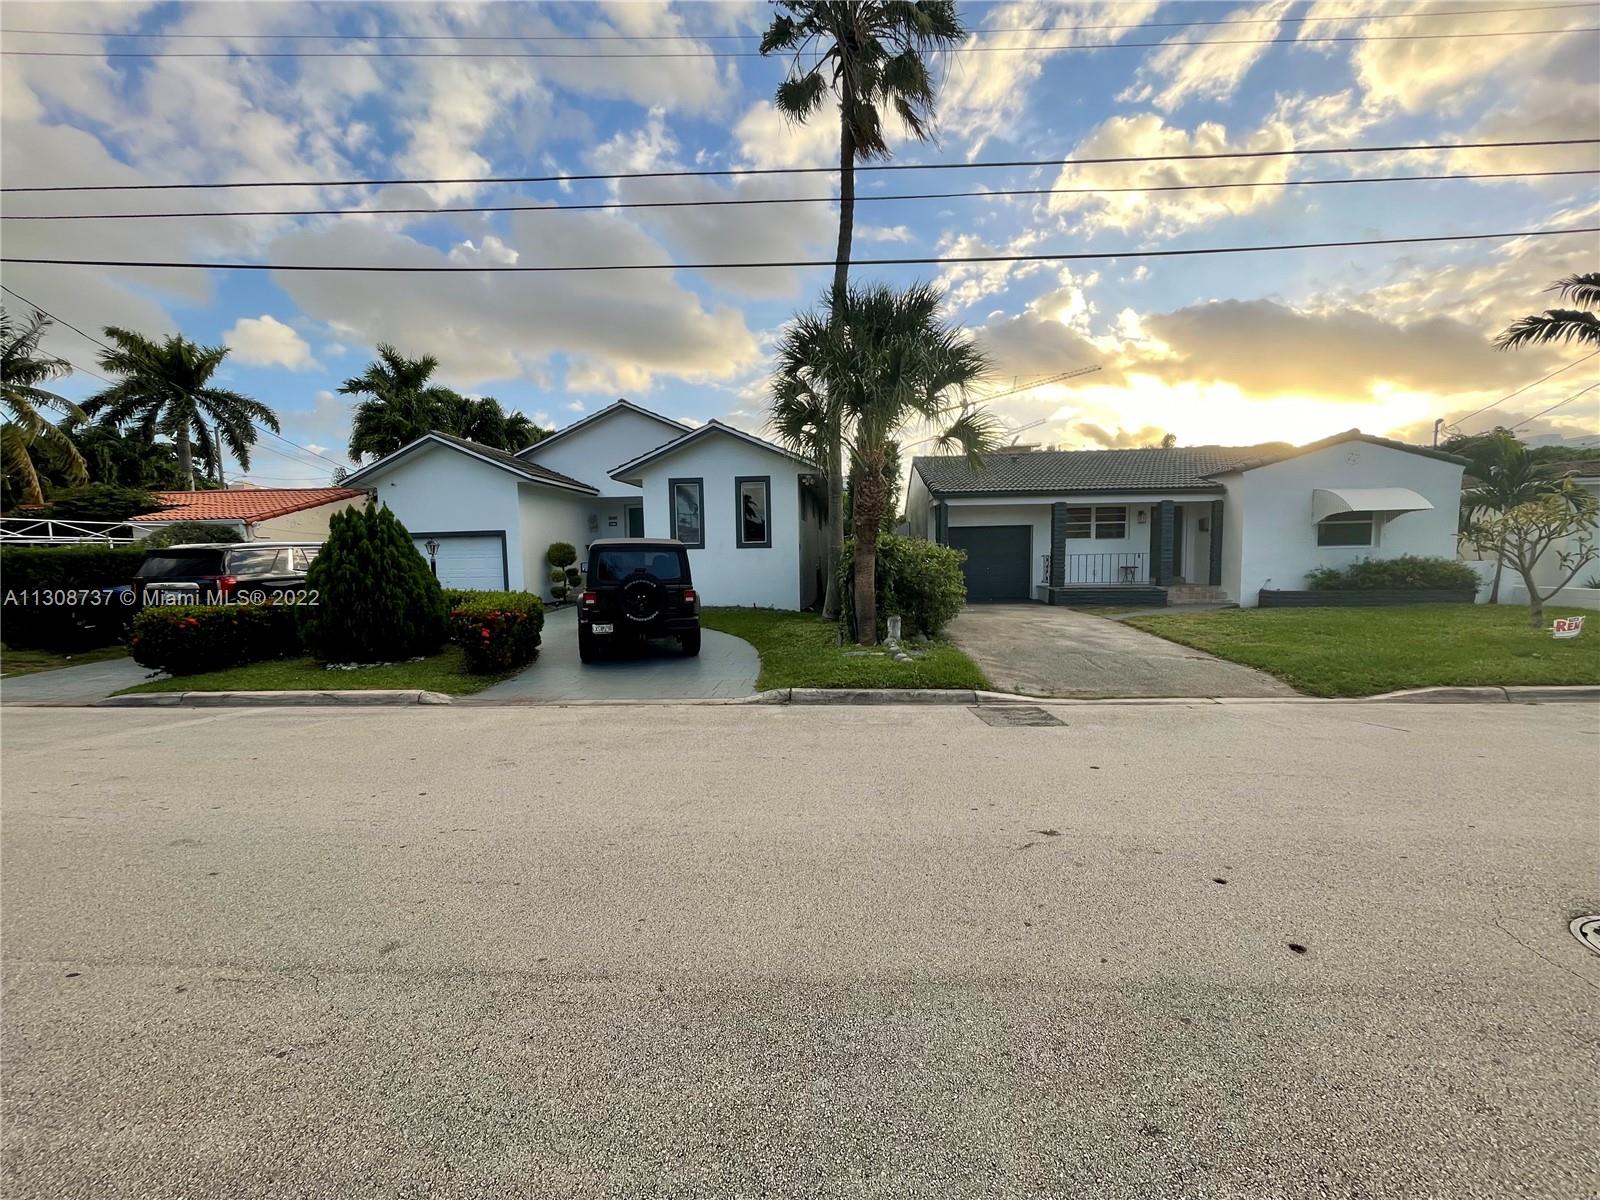 Two lots next to each other (11,200 sqft of land) each with move-in-ready homes for sale.  The two property addresses being sold together: 9181 Byron Ave and 9173 Byron Ave.  Combine the 2 lots to build your dream home or purchase as an investment portfolio for short- or long-term rentals in Miami's most desired neighborhood.  3 blocks from the beach, walking distance to parks, shops, and places of worship.  Both existing homes are fully renovated with modern finishes, new appliances/plumbing, and light filled interiors.

Call to set up a showing today.